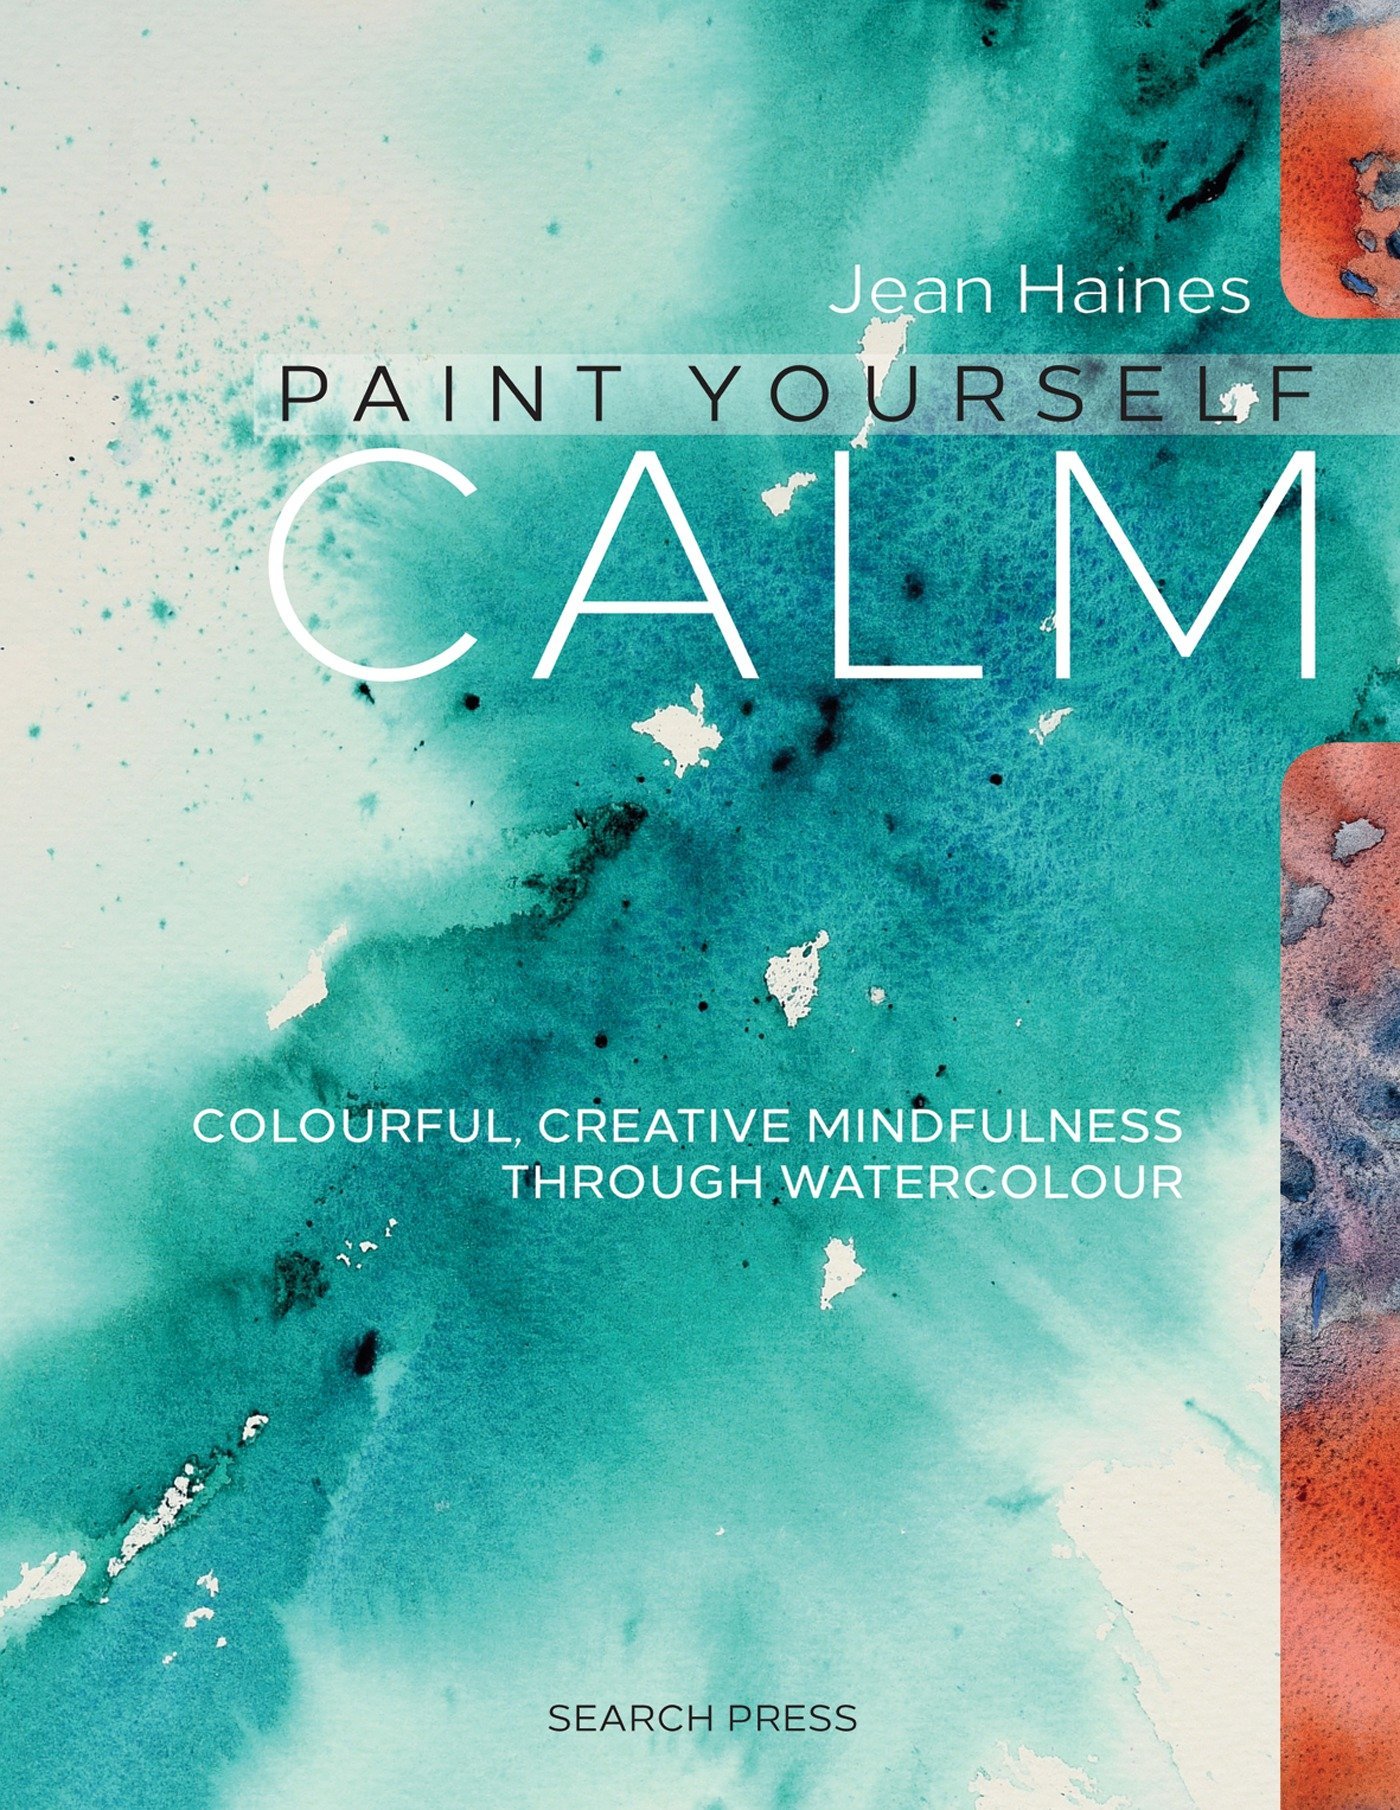 Image for "Paint Yourself Calm"